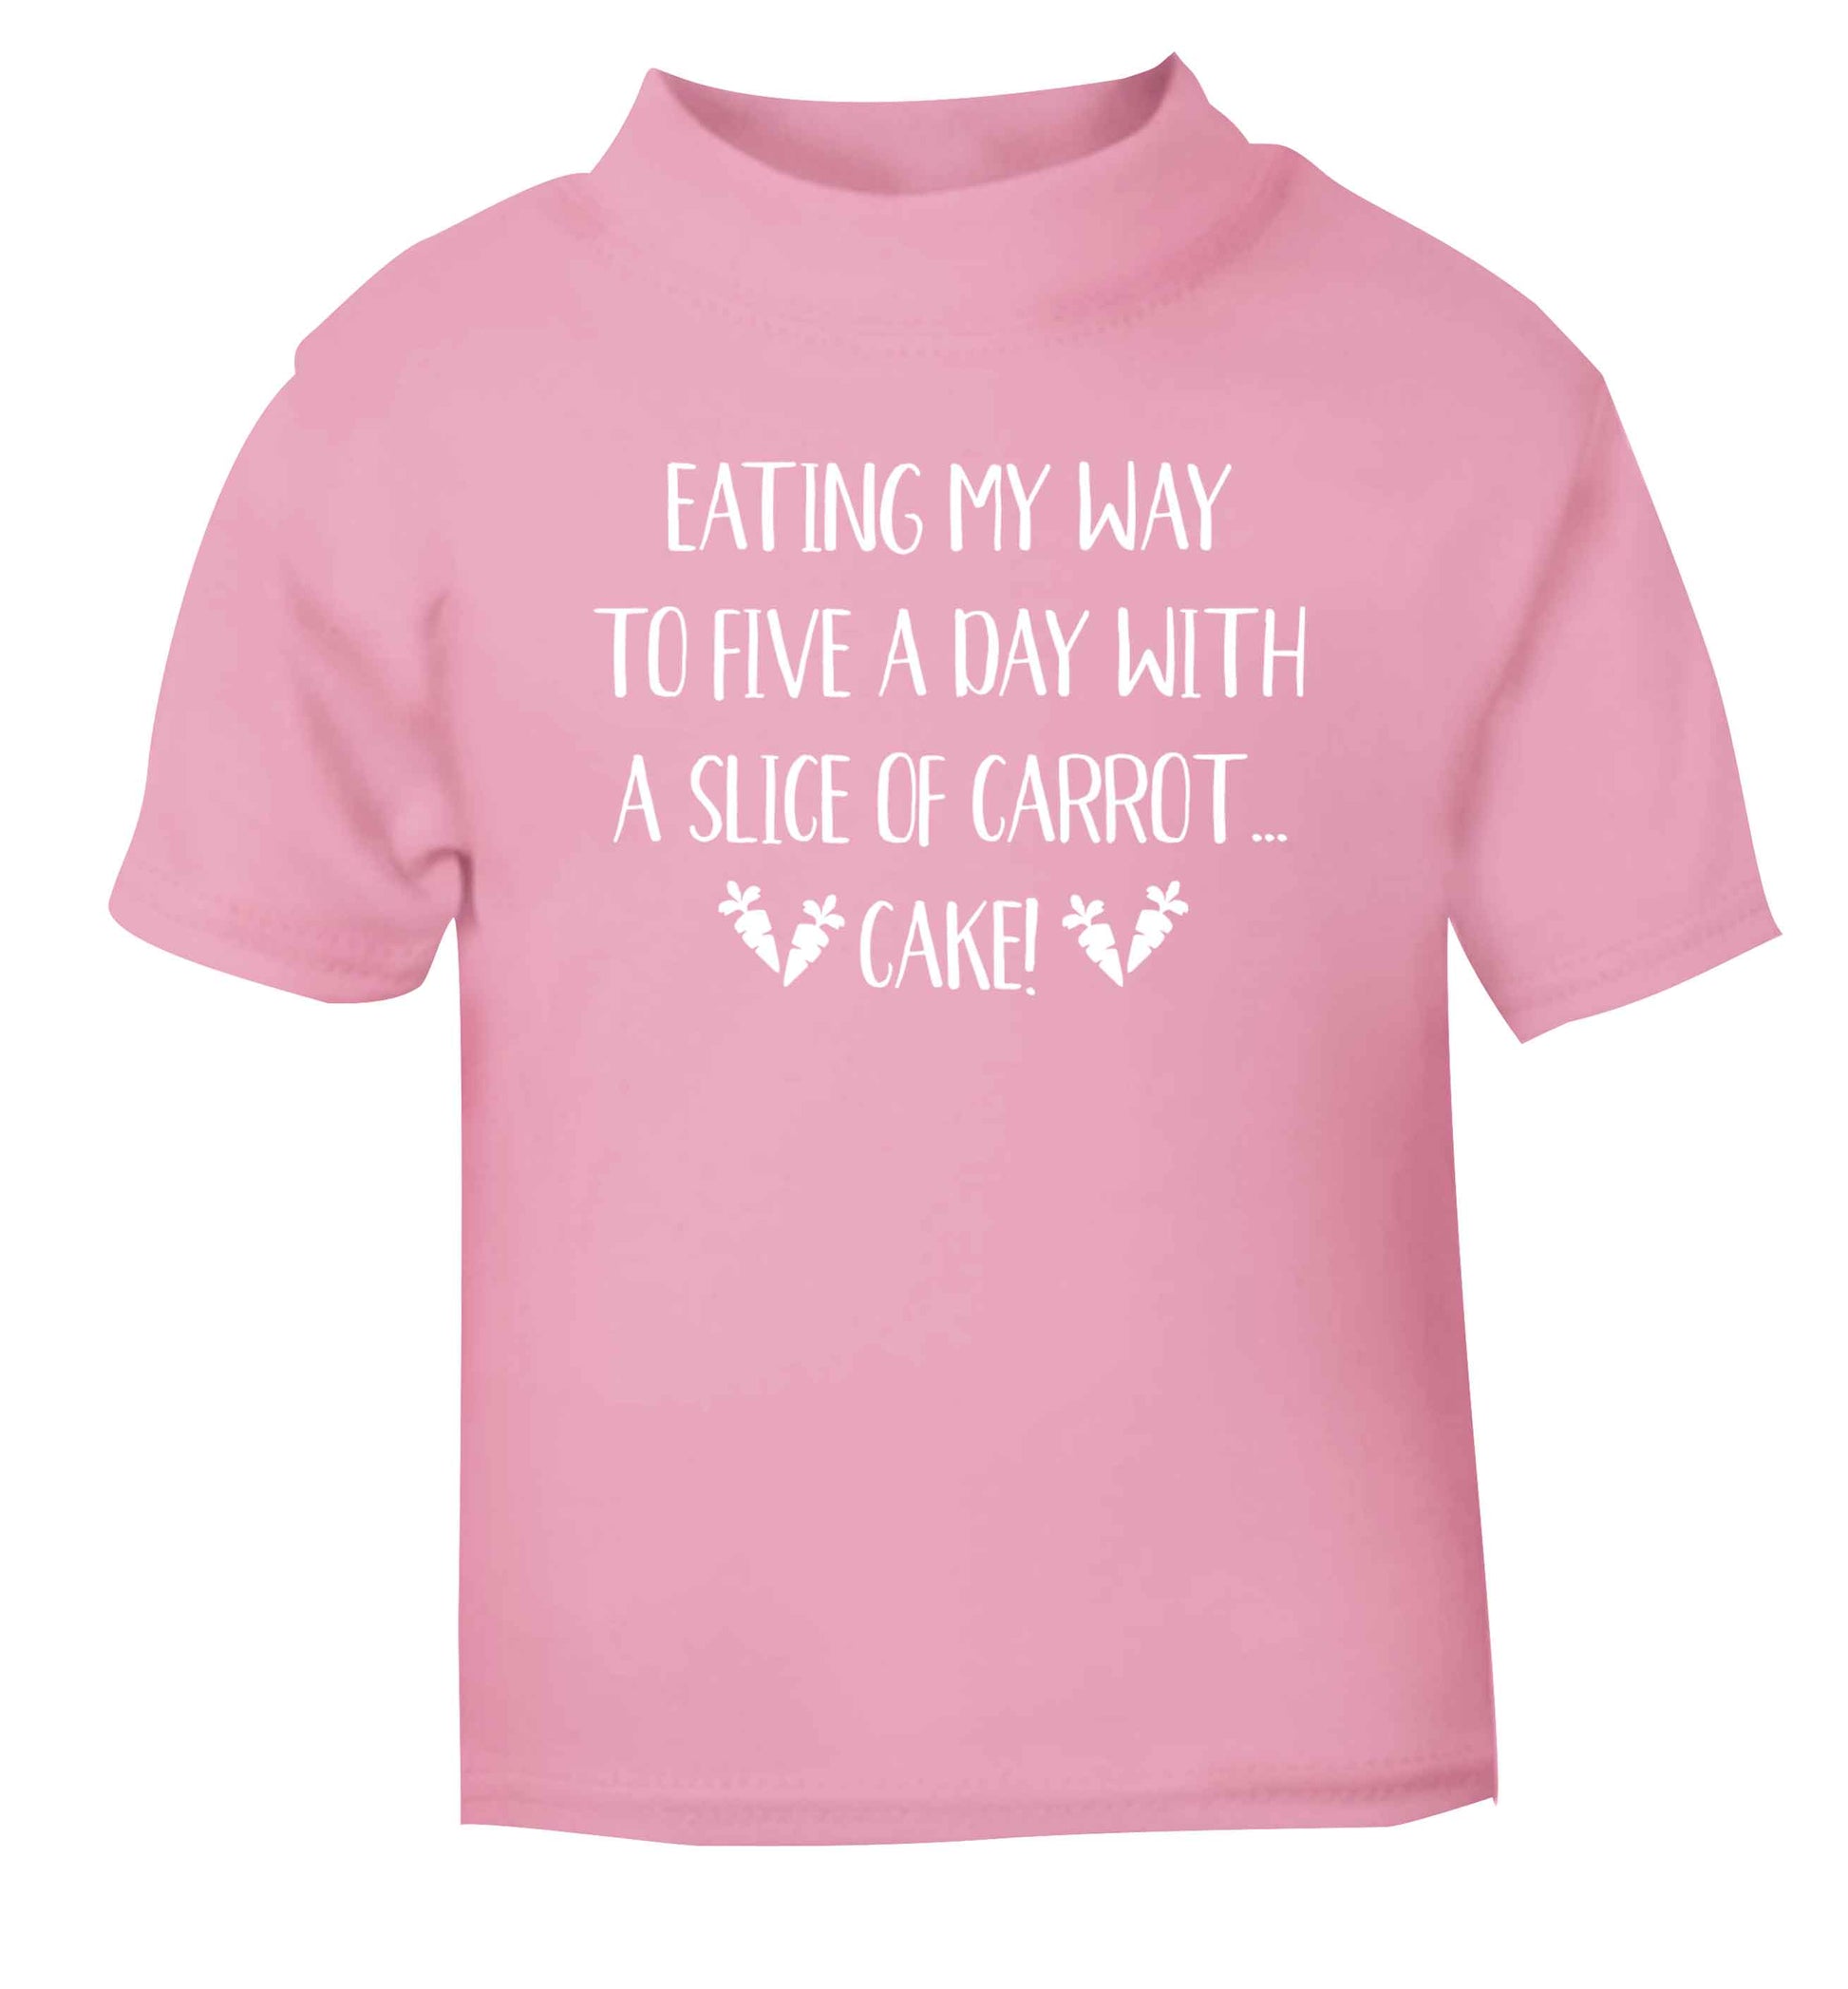 Eating my way to five a day with a slice of carrot cake day light pink Baby Toddler Tshirt 2 Years